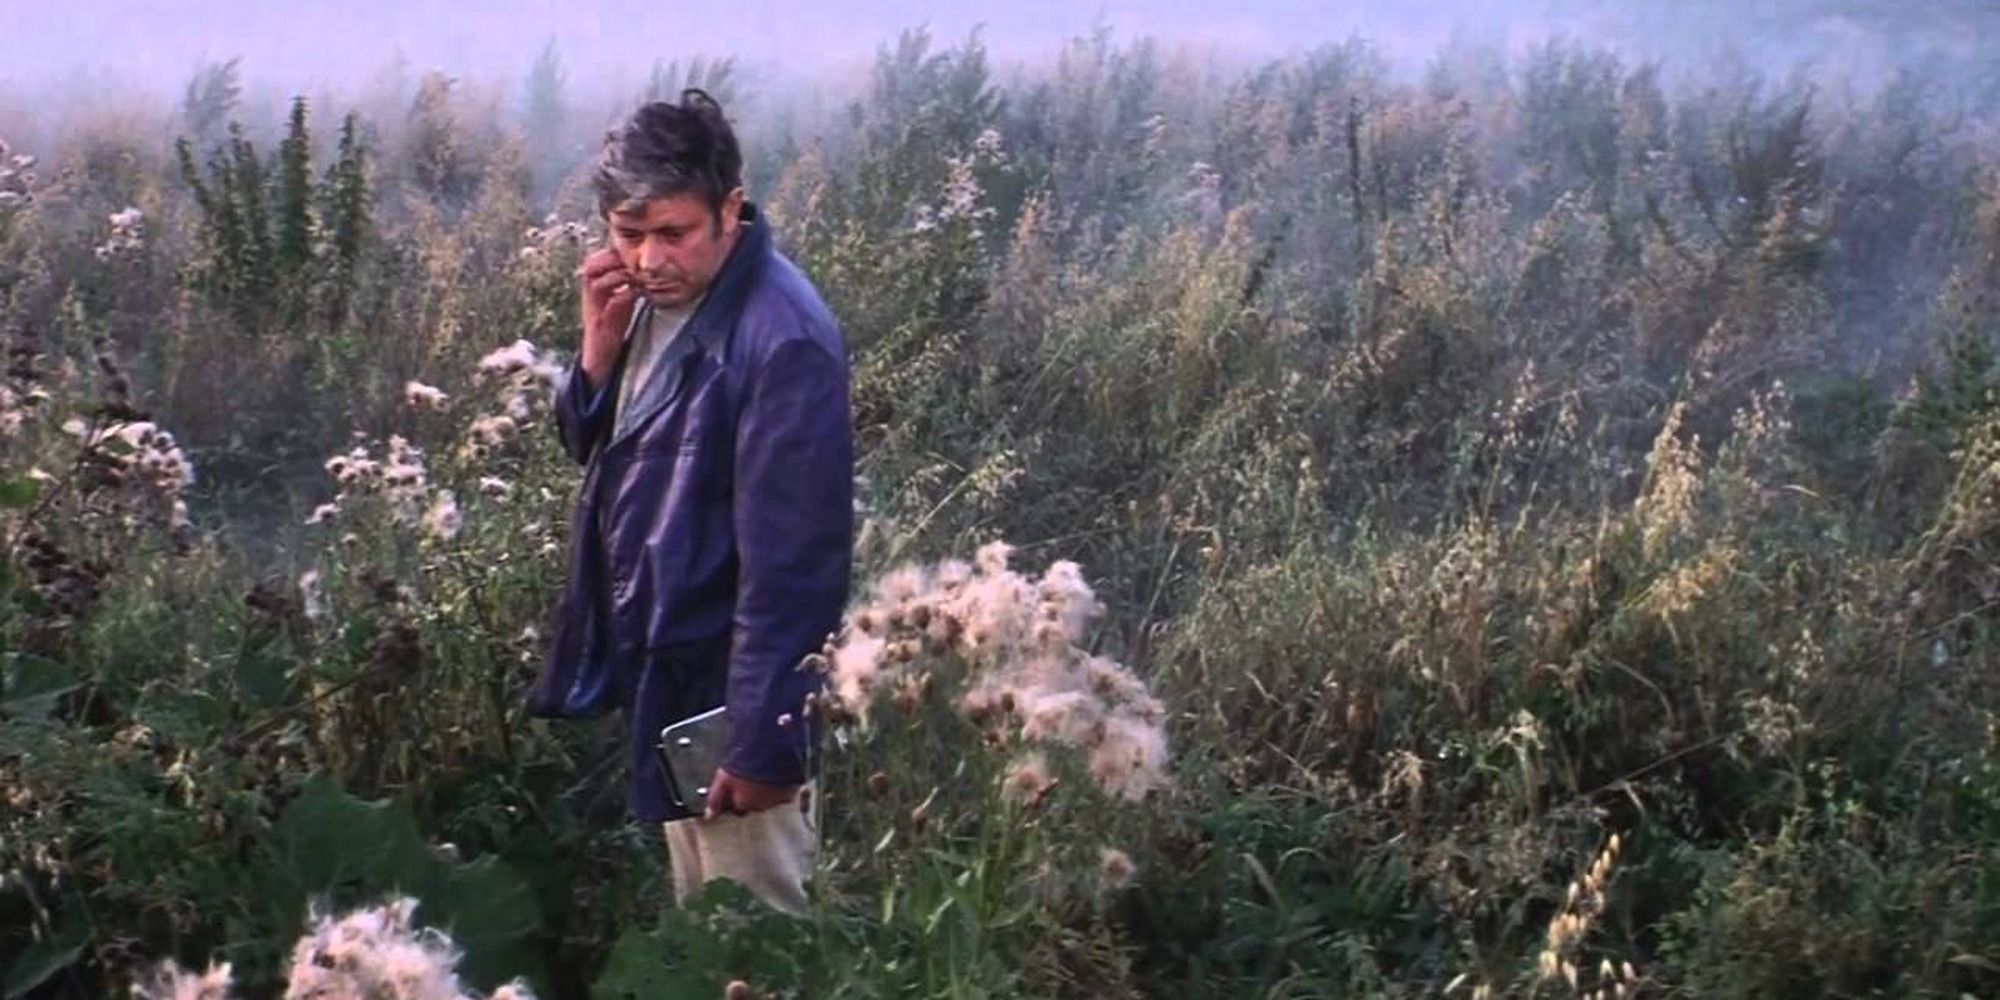 A man contemplating his surroundings in a grassy field full of lush plants